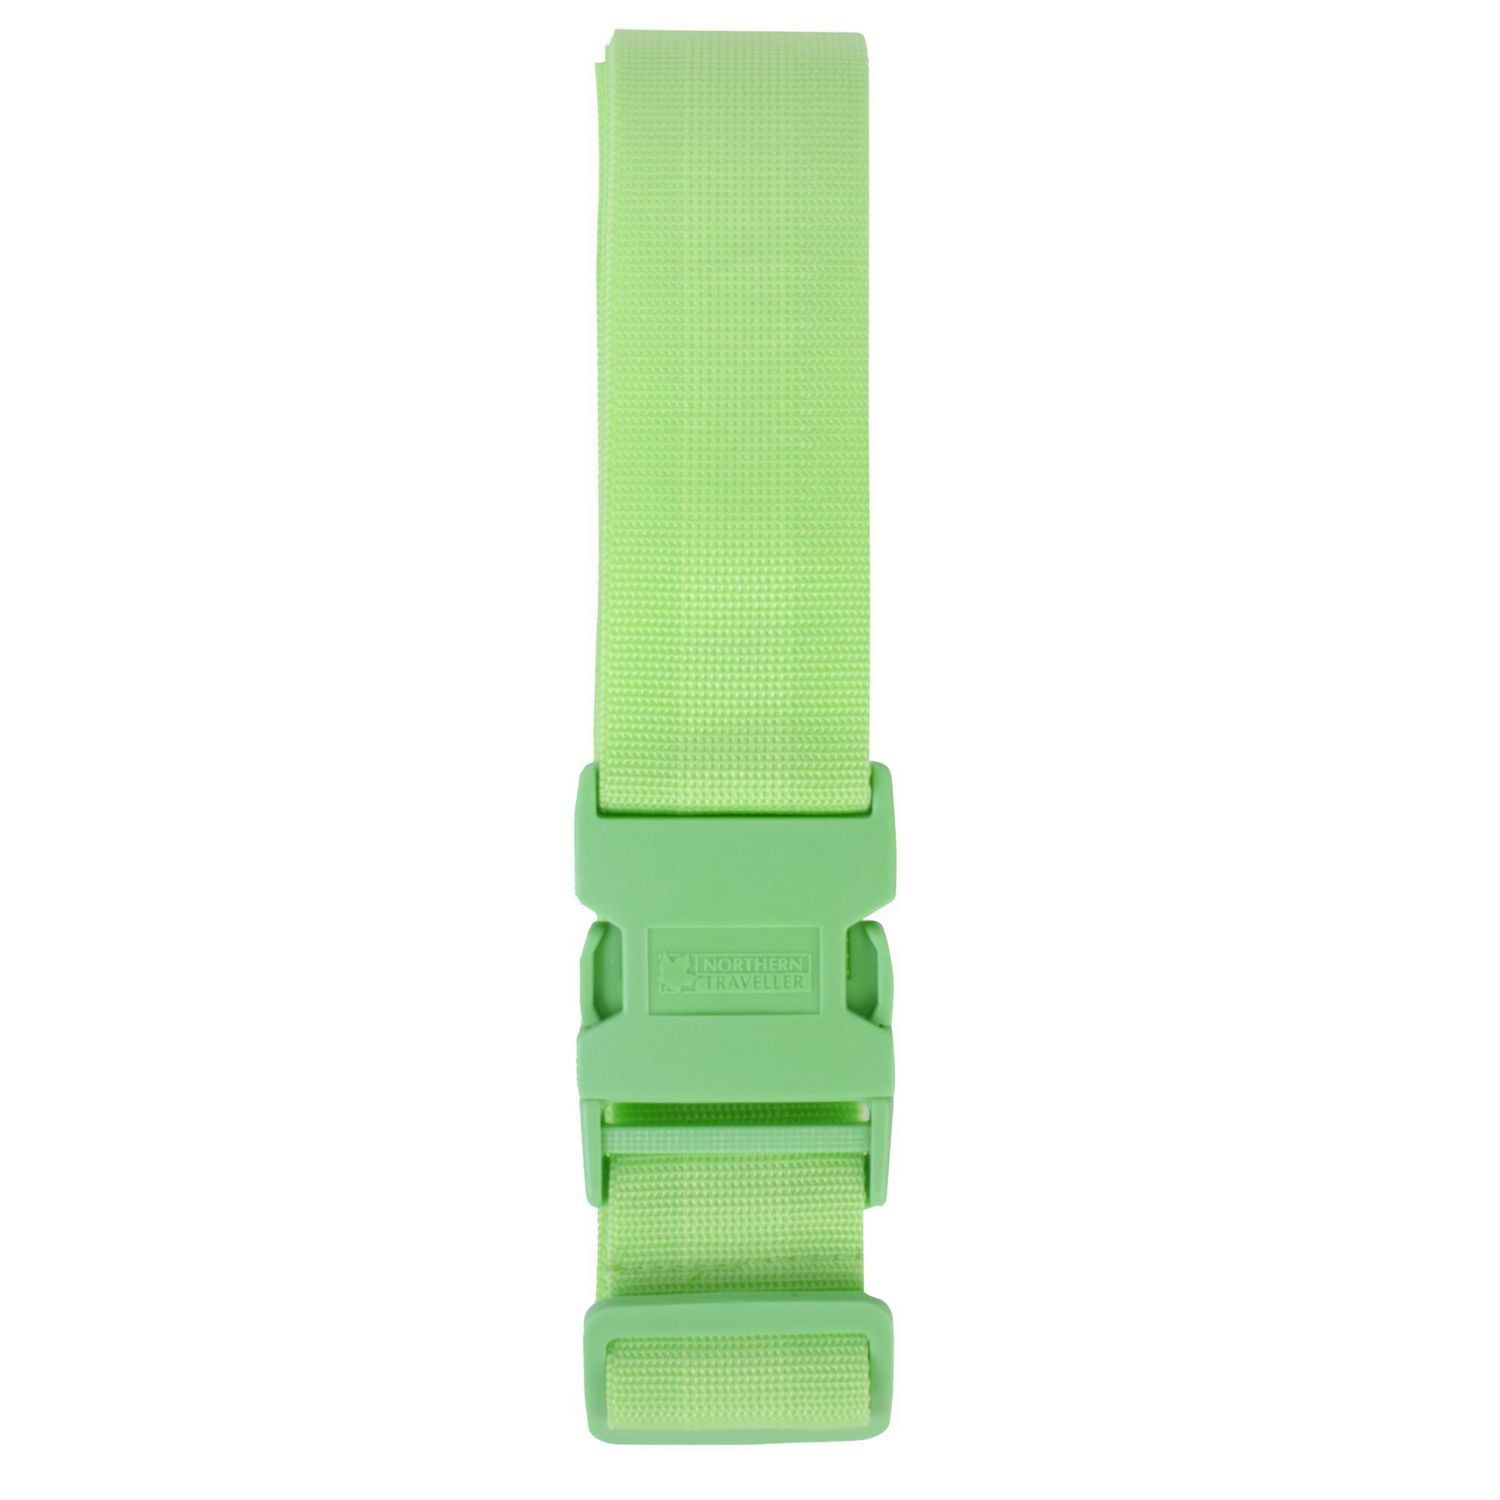 1pc Green Outdoor Luggage Binding Belt Double-Locking Buckle Type Travel  Bag Packing Safety Strap, Cargo Strapping, Tightening Rope